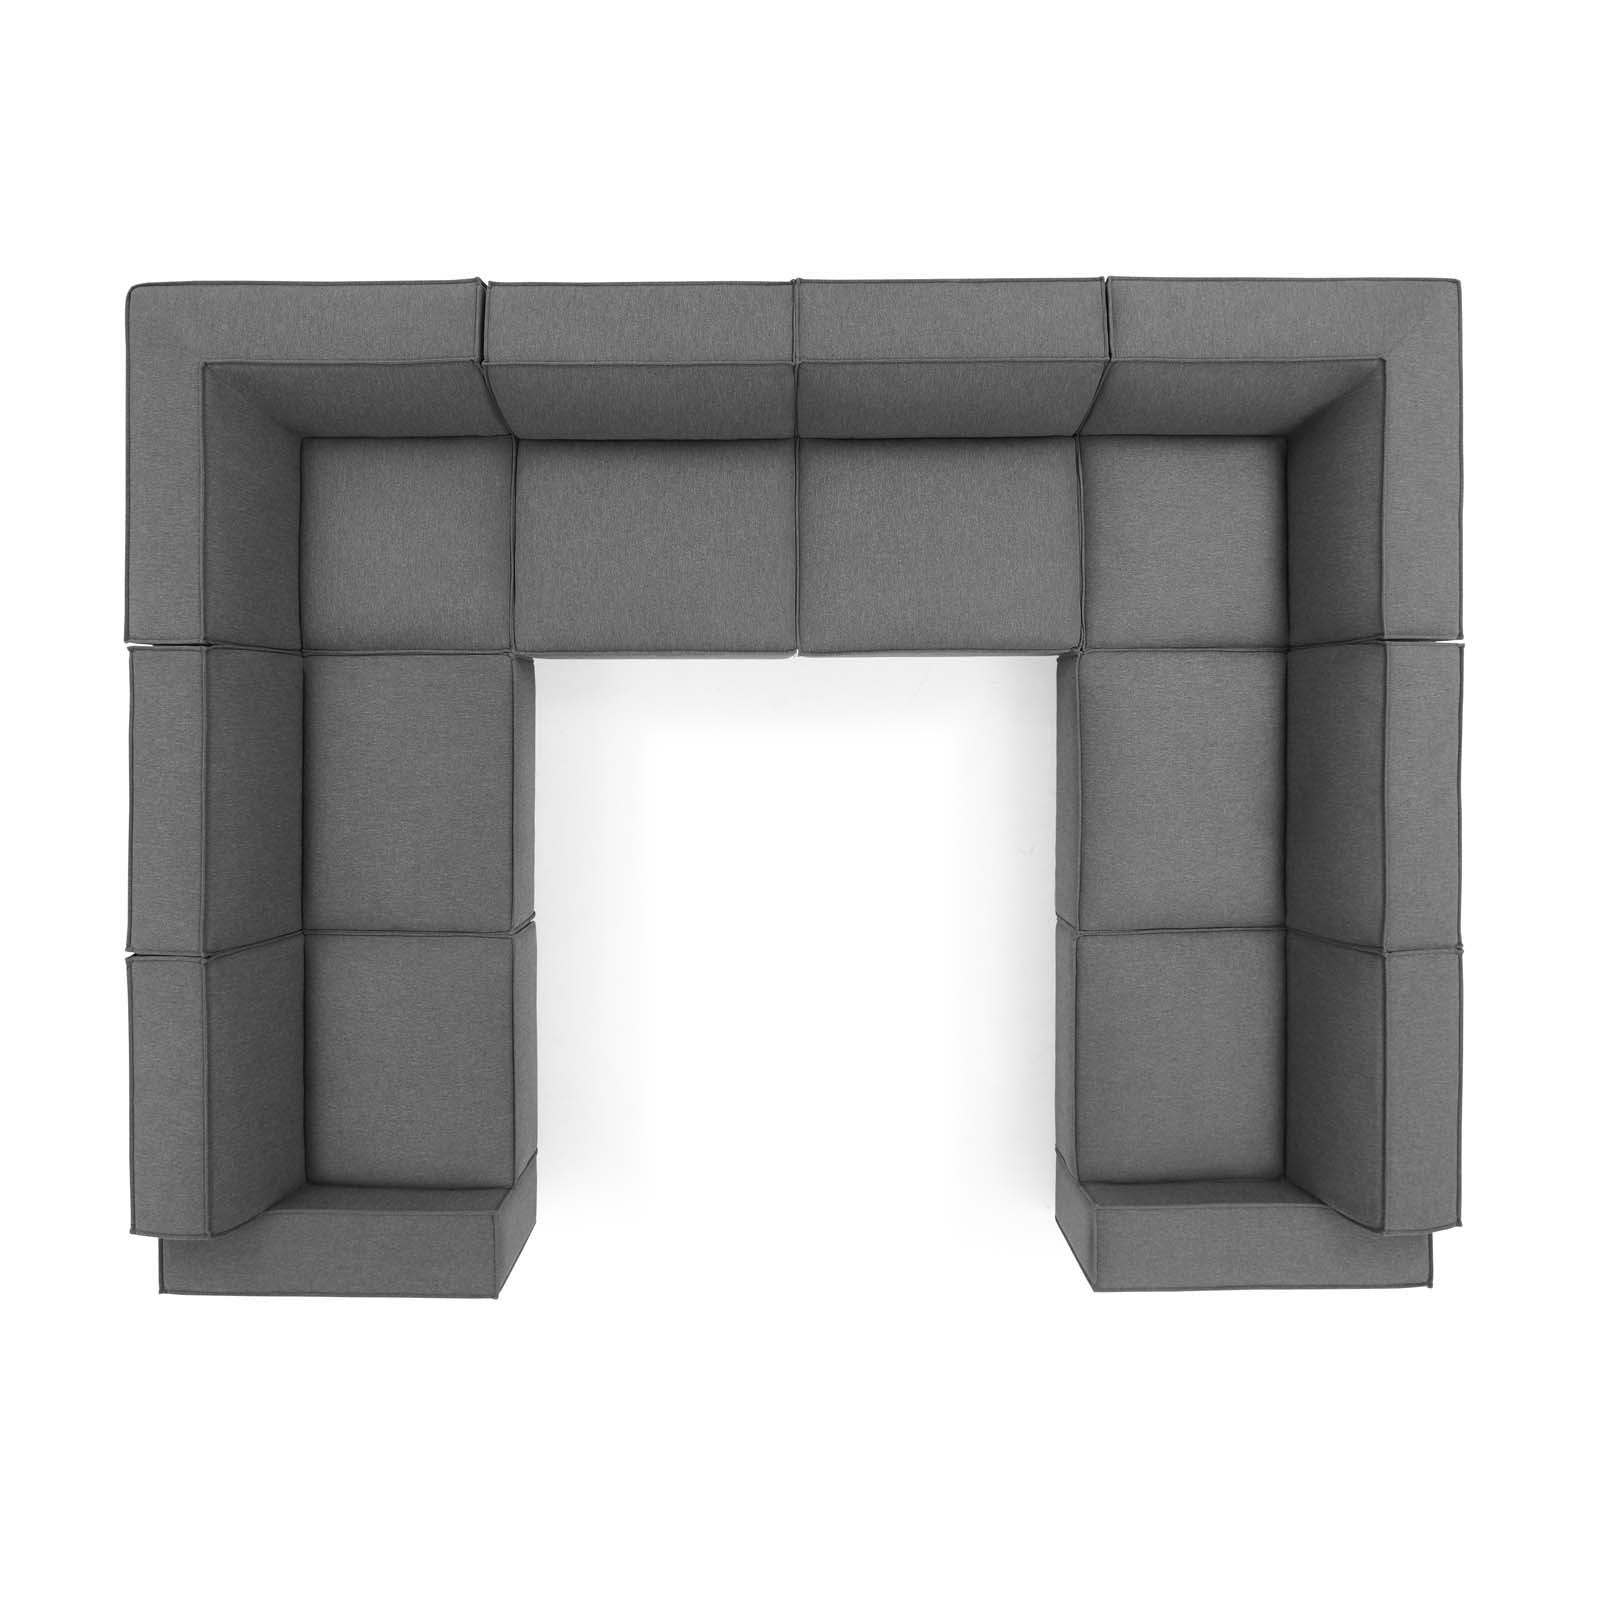 Modway Sectional Sofas - Restore 8-Piece Sectional Sofa Charcoal